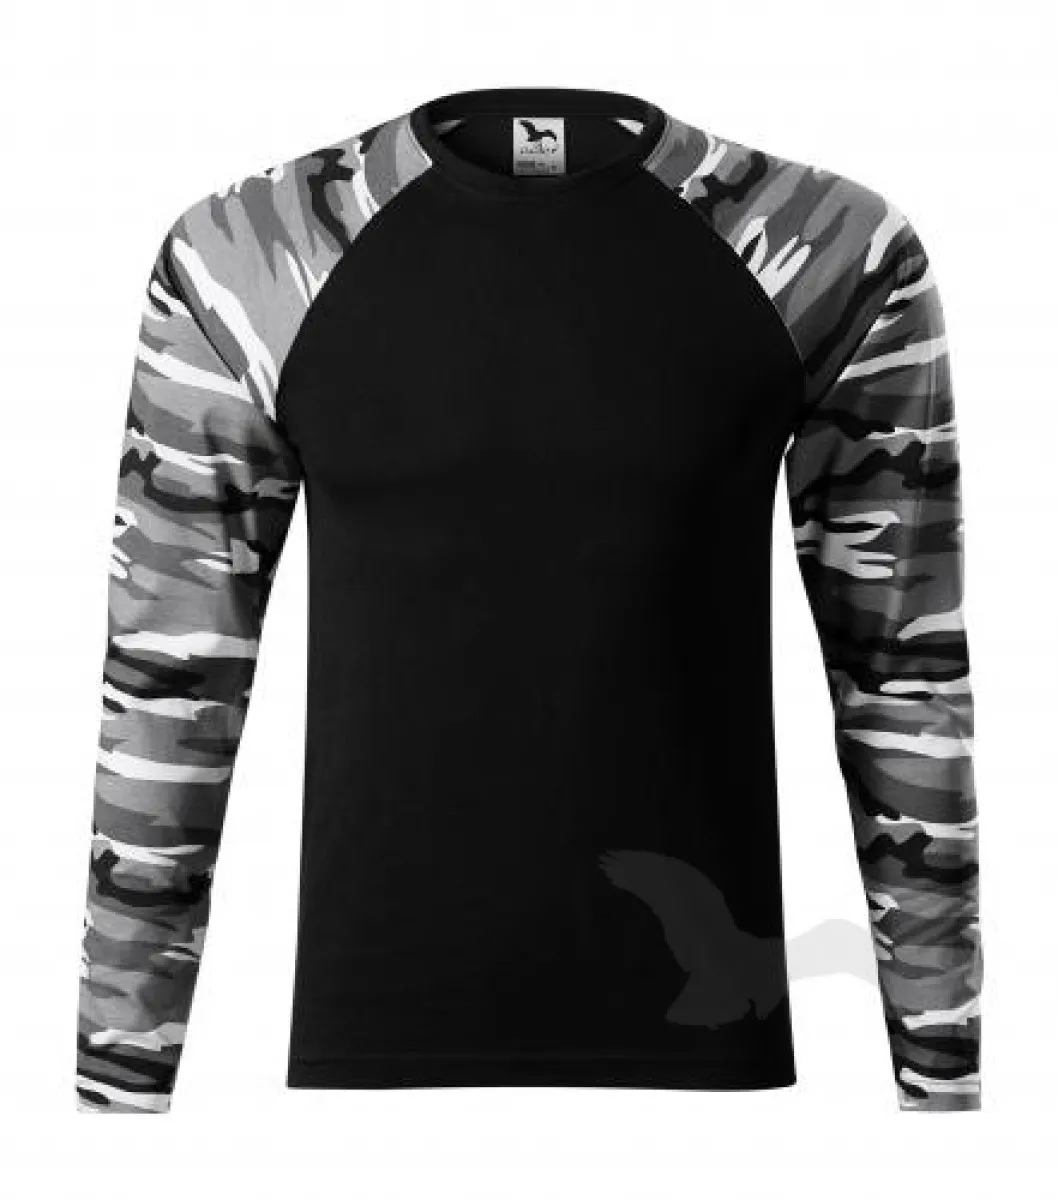 Camouflage T-shirt grey long sleeve front